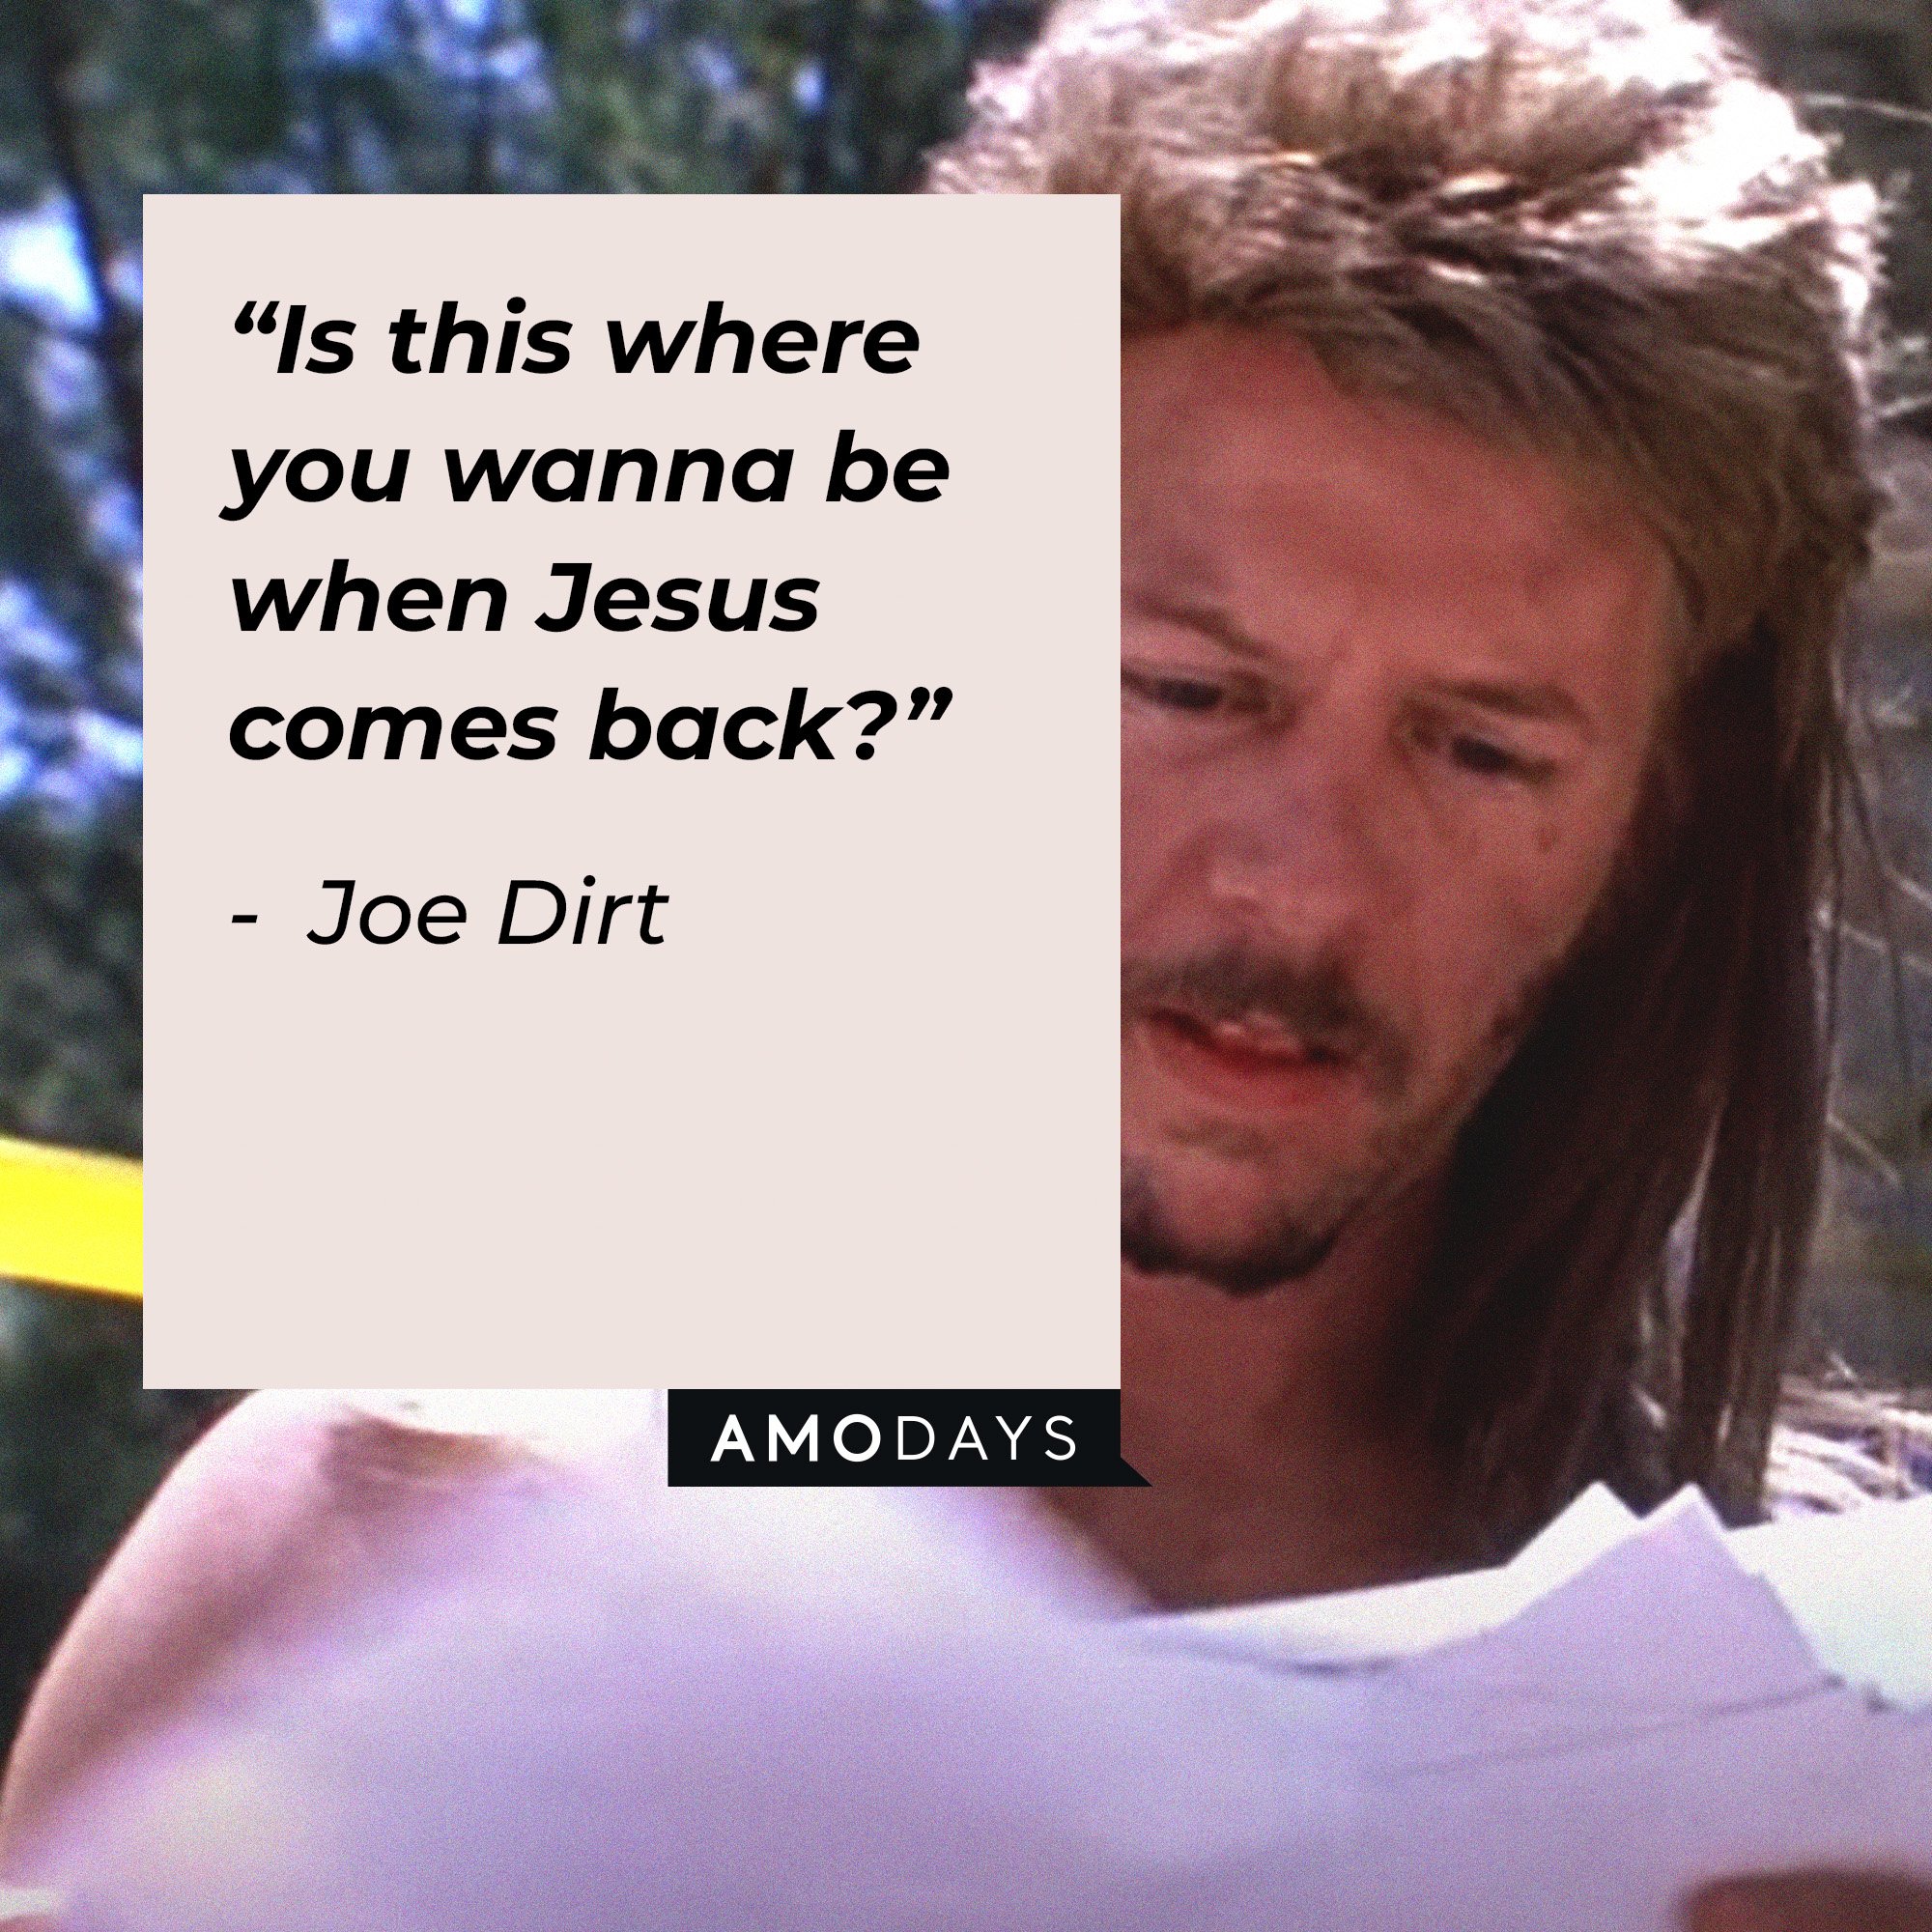 Joe Dirt's quote: “Is this where you wanna be when Jesus comes back?” | Image: AmoDays